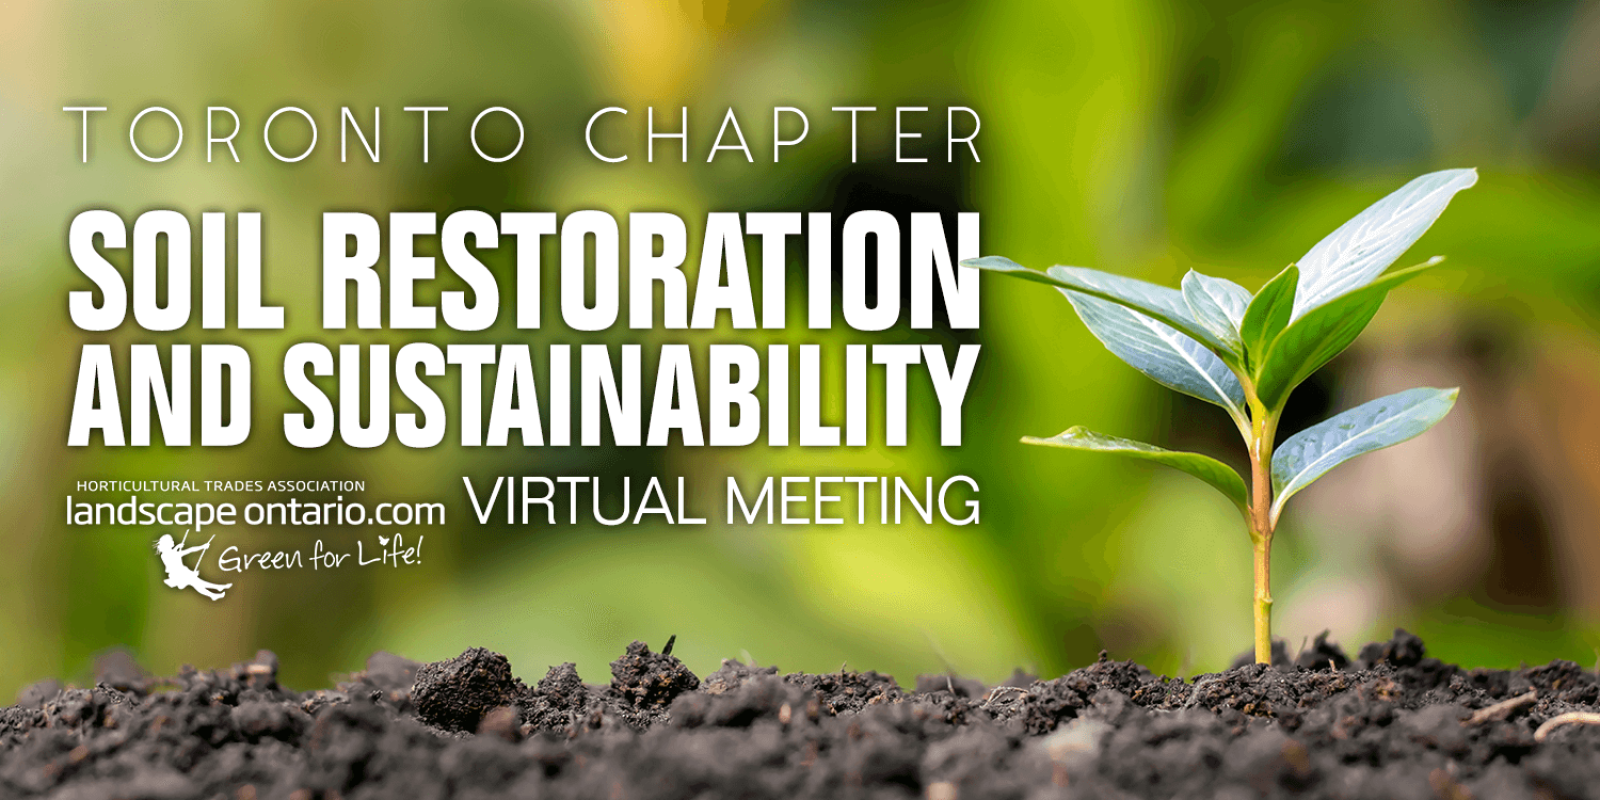 Toronto Chapter Soil Restoration and Sustainability Meeting